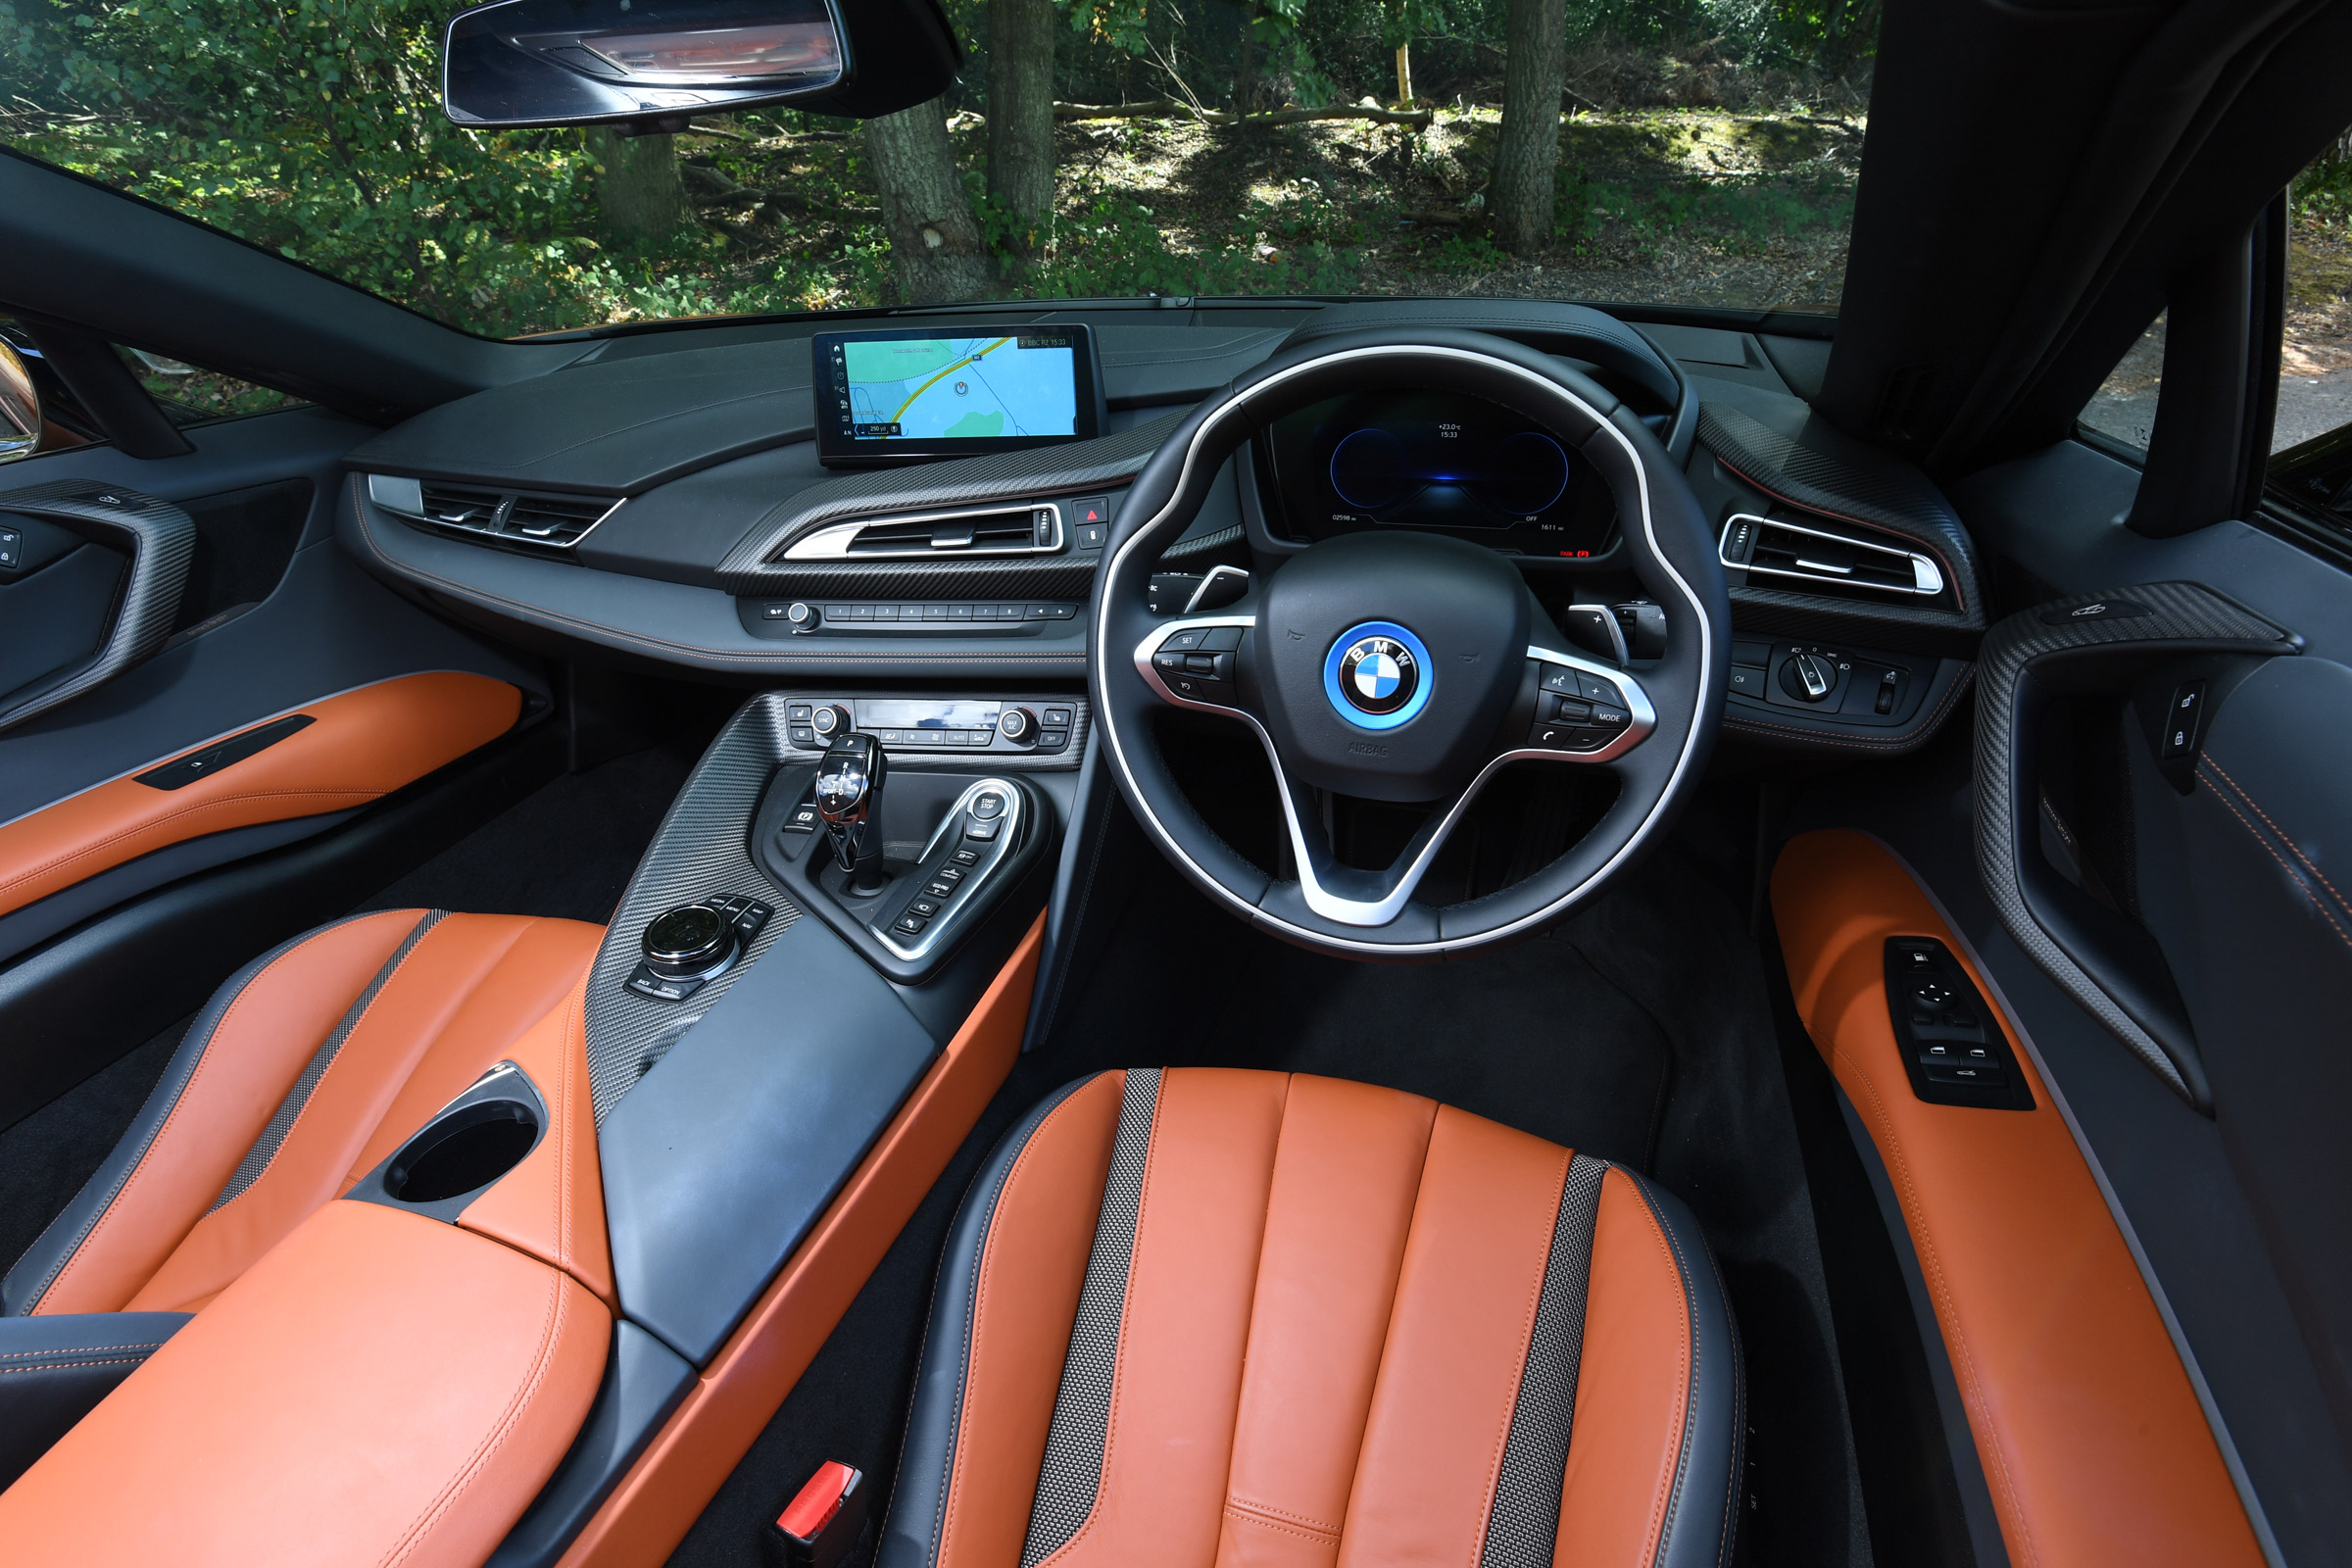 BMW i8 Practicality, Boot Size, Dimensions & Luggage Capacity